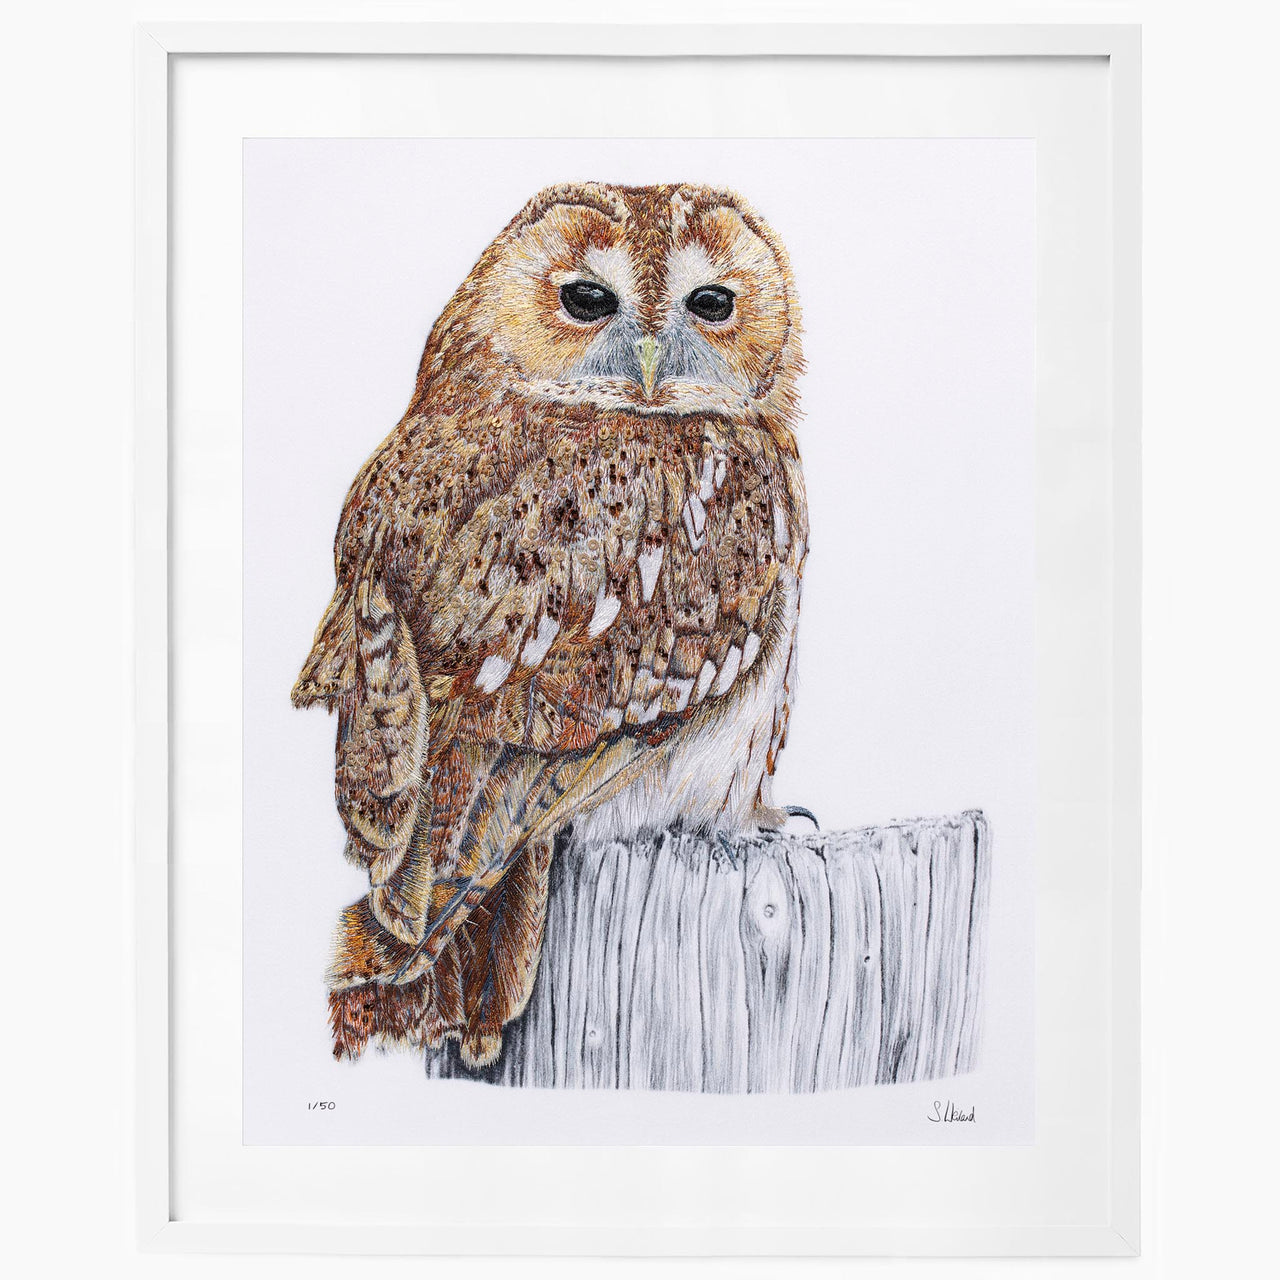 limited edition print of a Owl hand embroidery in white frame